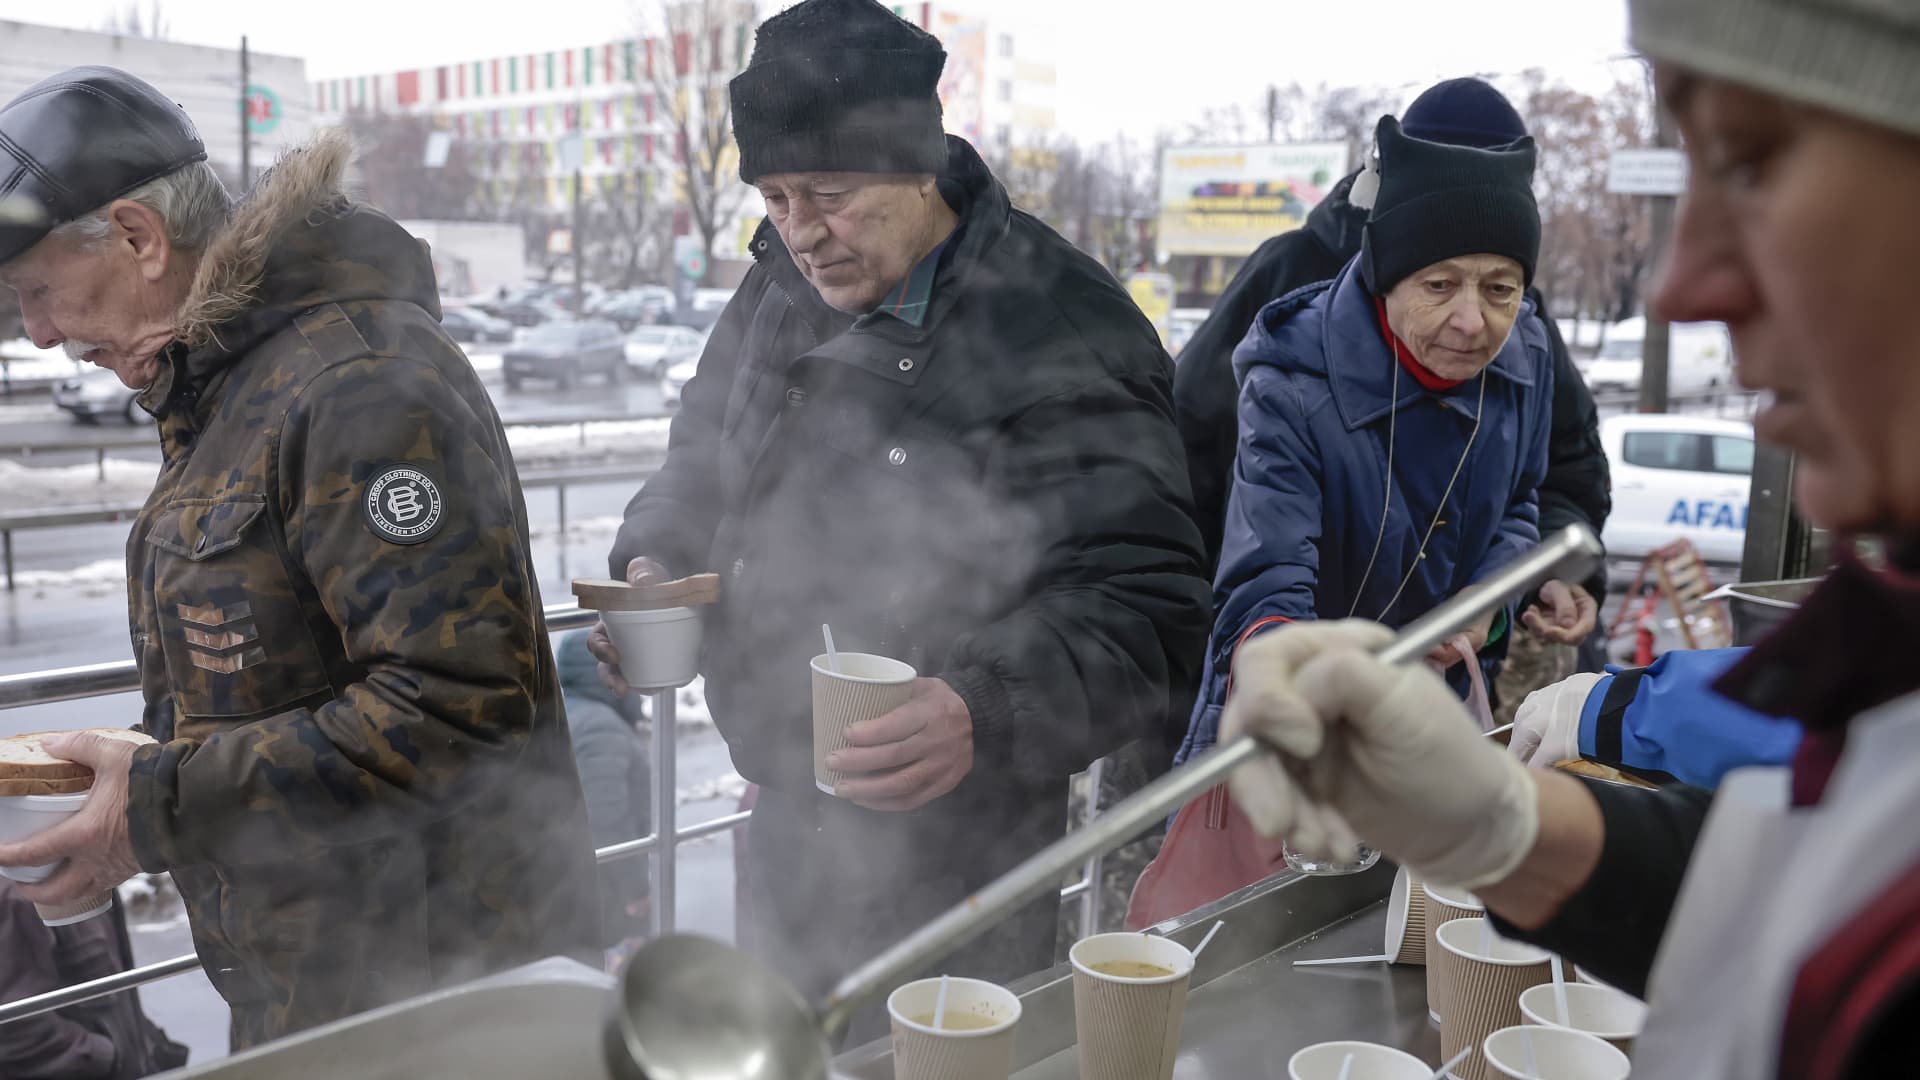 People receive food from AFAT - Disaster and Emergency Management Presidency on November 28, 2022 in Chernihiv, Ukraine.